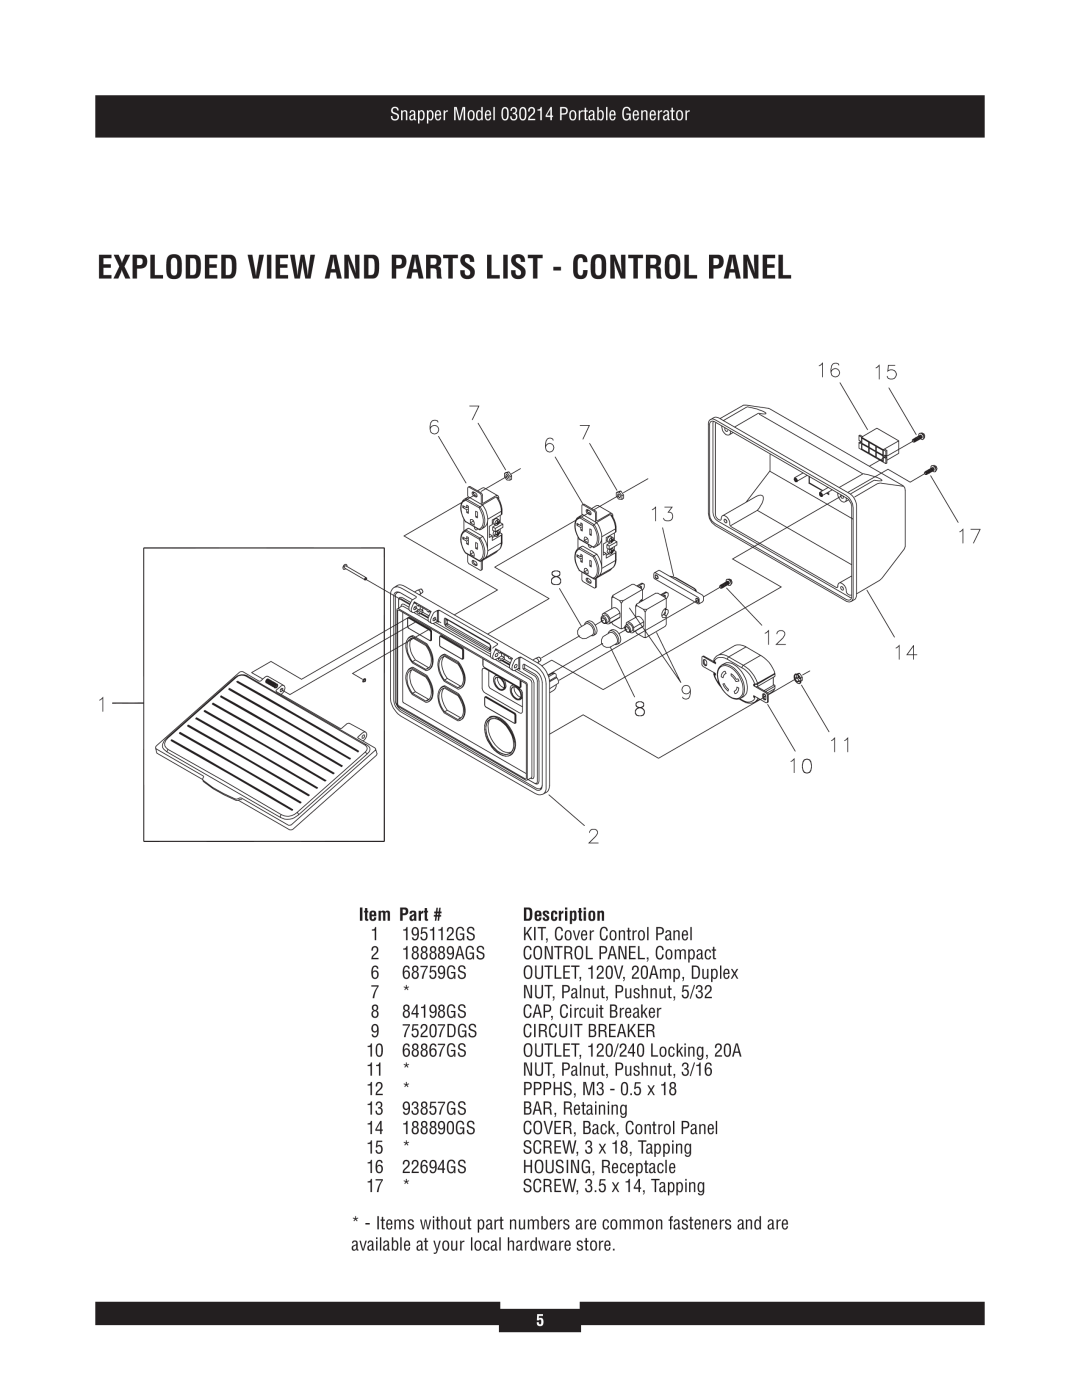 Snapper manual Exploded View And Parts List - Control Panel, Snapper Model 030214 Portable Generator, Item Part # 